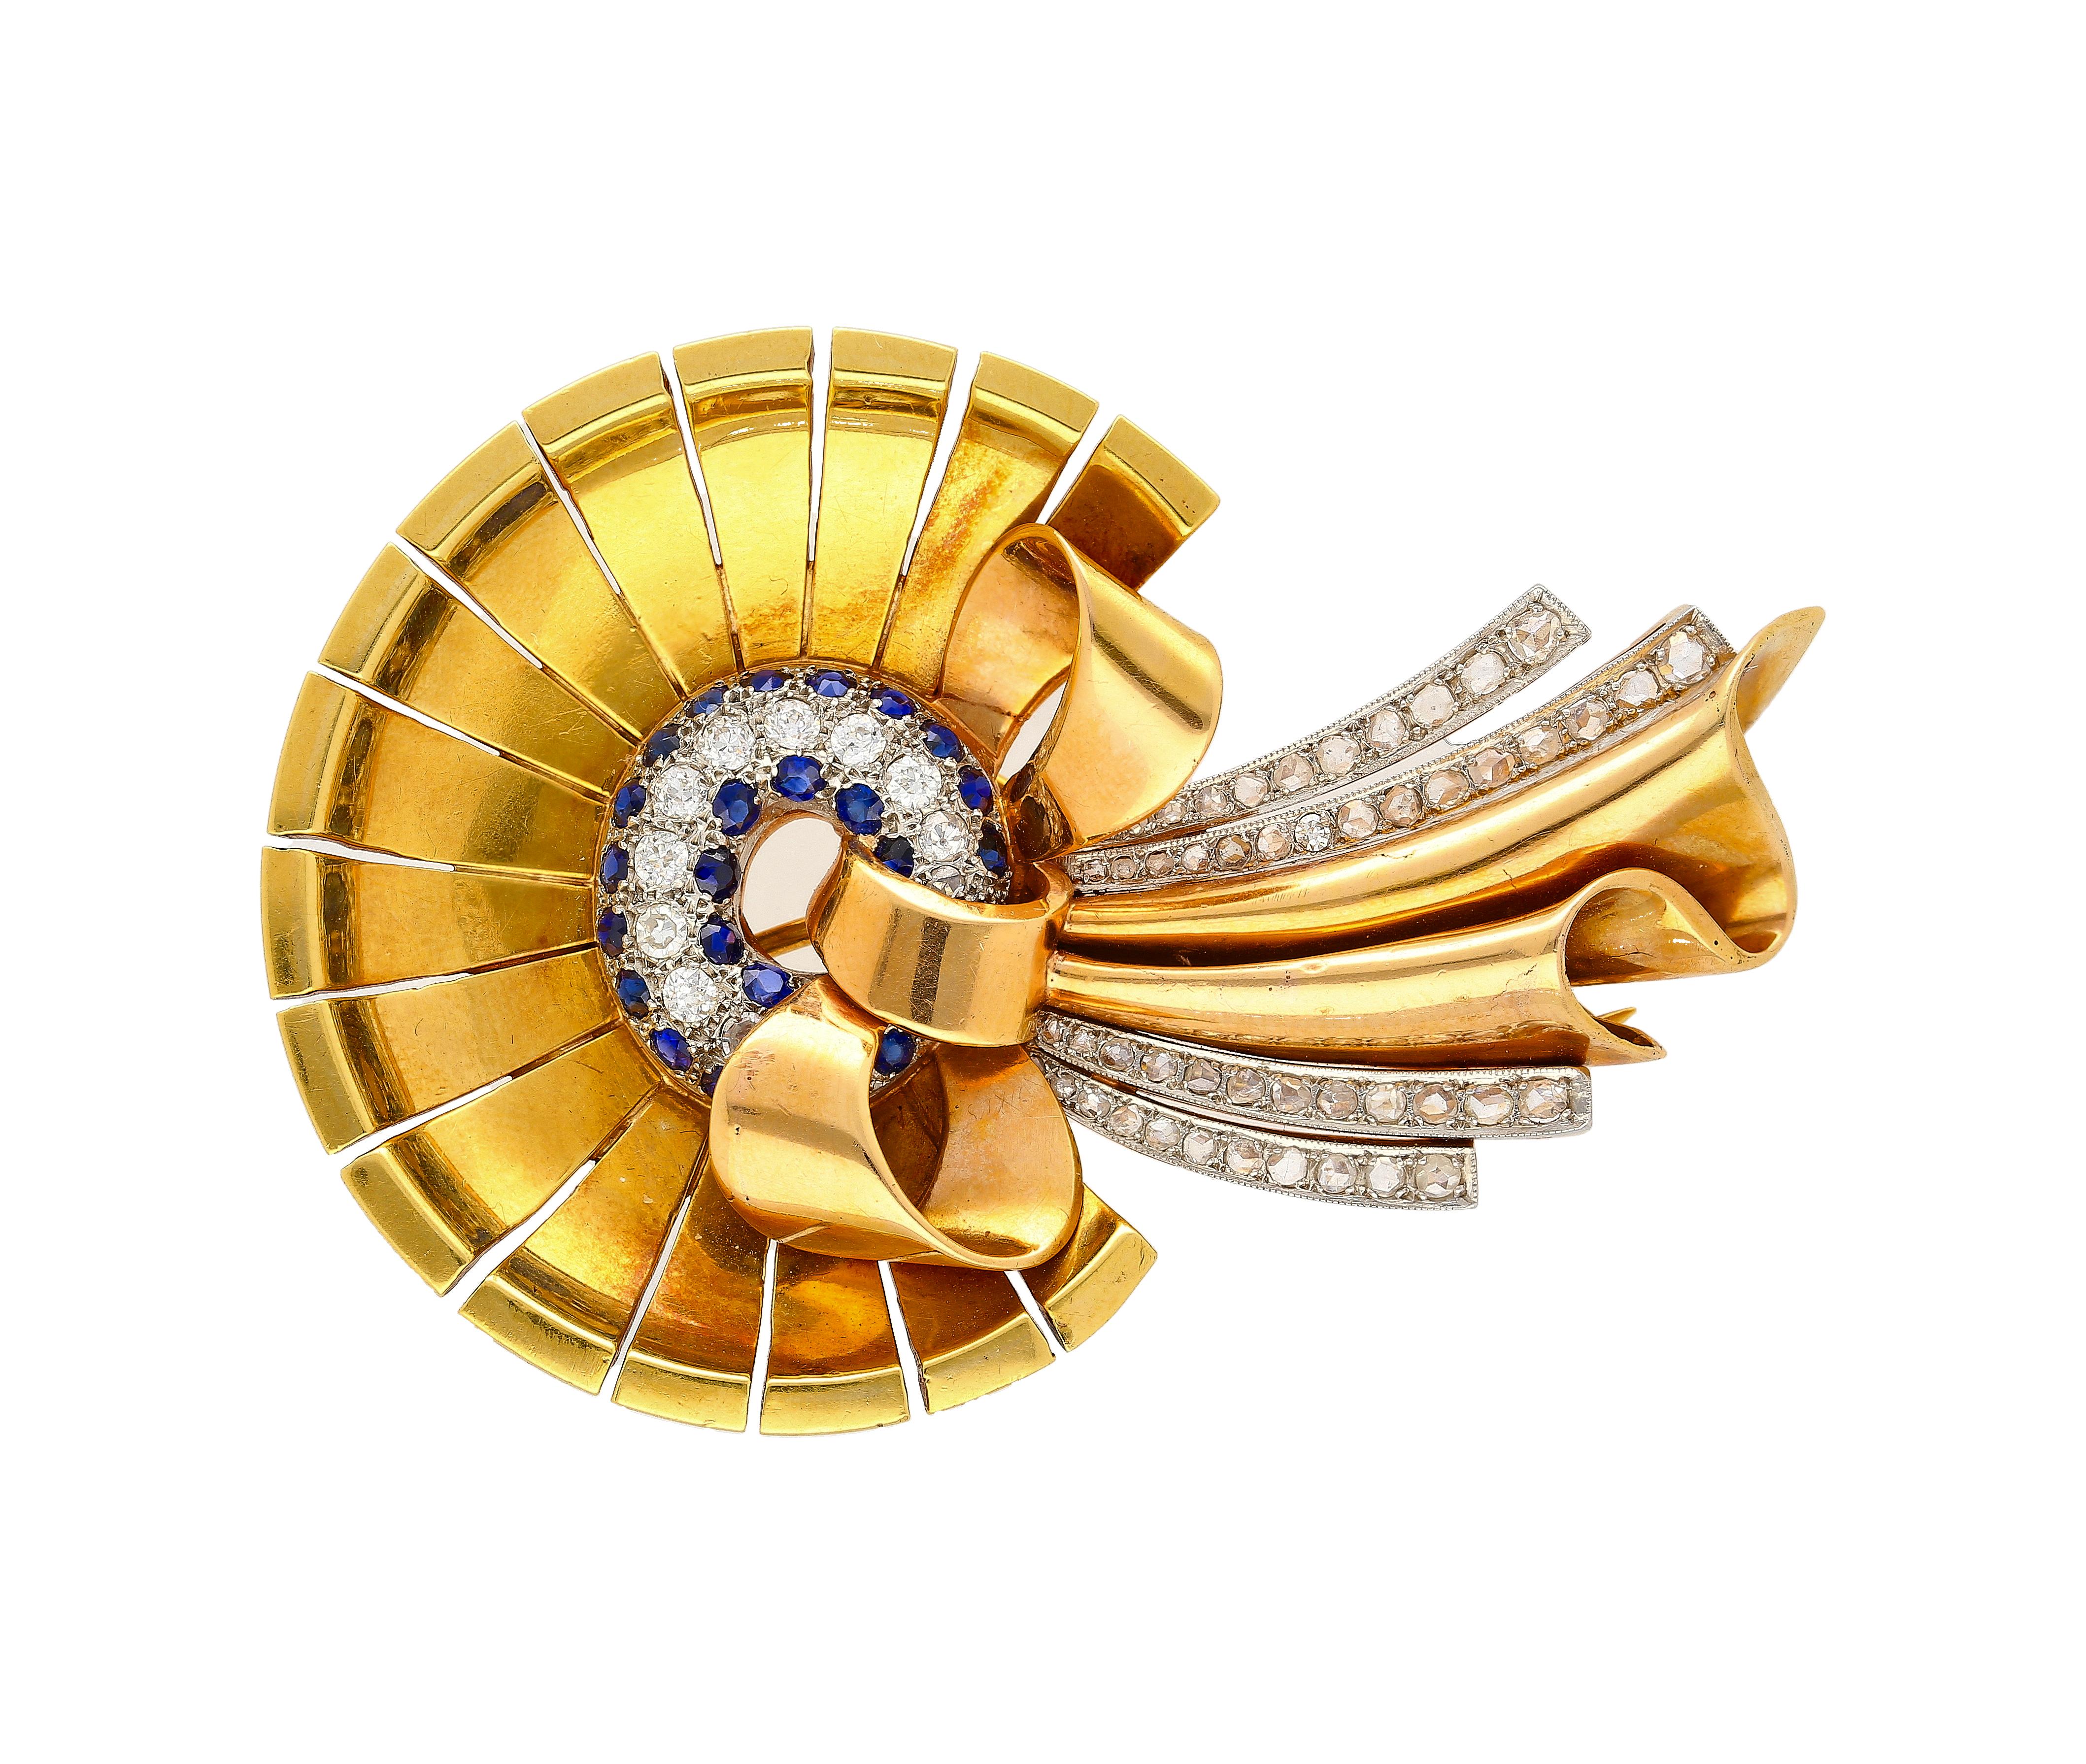 1940's Diamond and Sapphire Bonnet (Hat) and Ribbon Brooch crafted in 18K Rose and Yellow Gold. This exquisite pin/brooch weighs 34.86 grams and features a prong setting, showcasing intricate details in a size of 6.8 x 4.5 CM.

The brooch is adorned